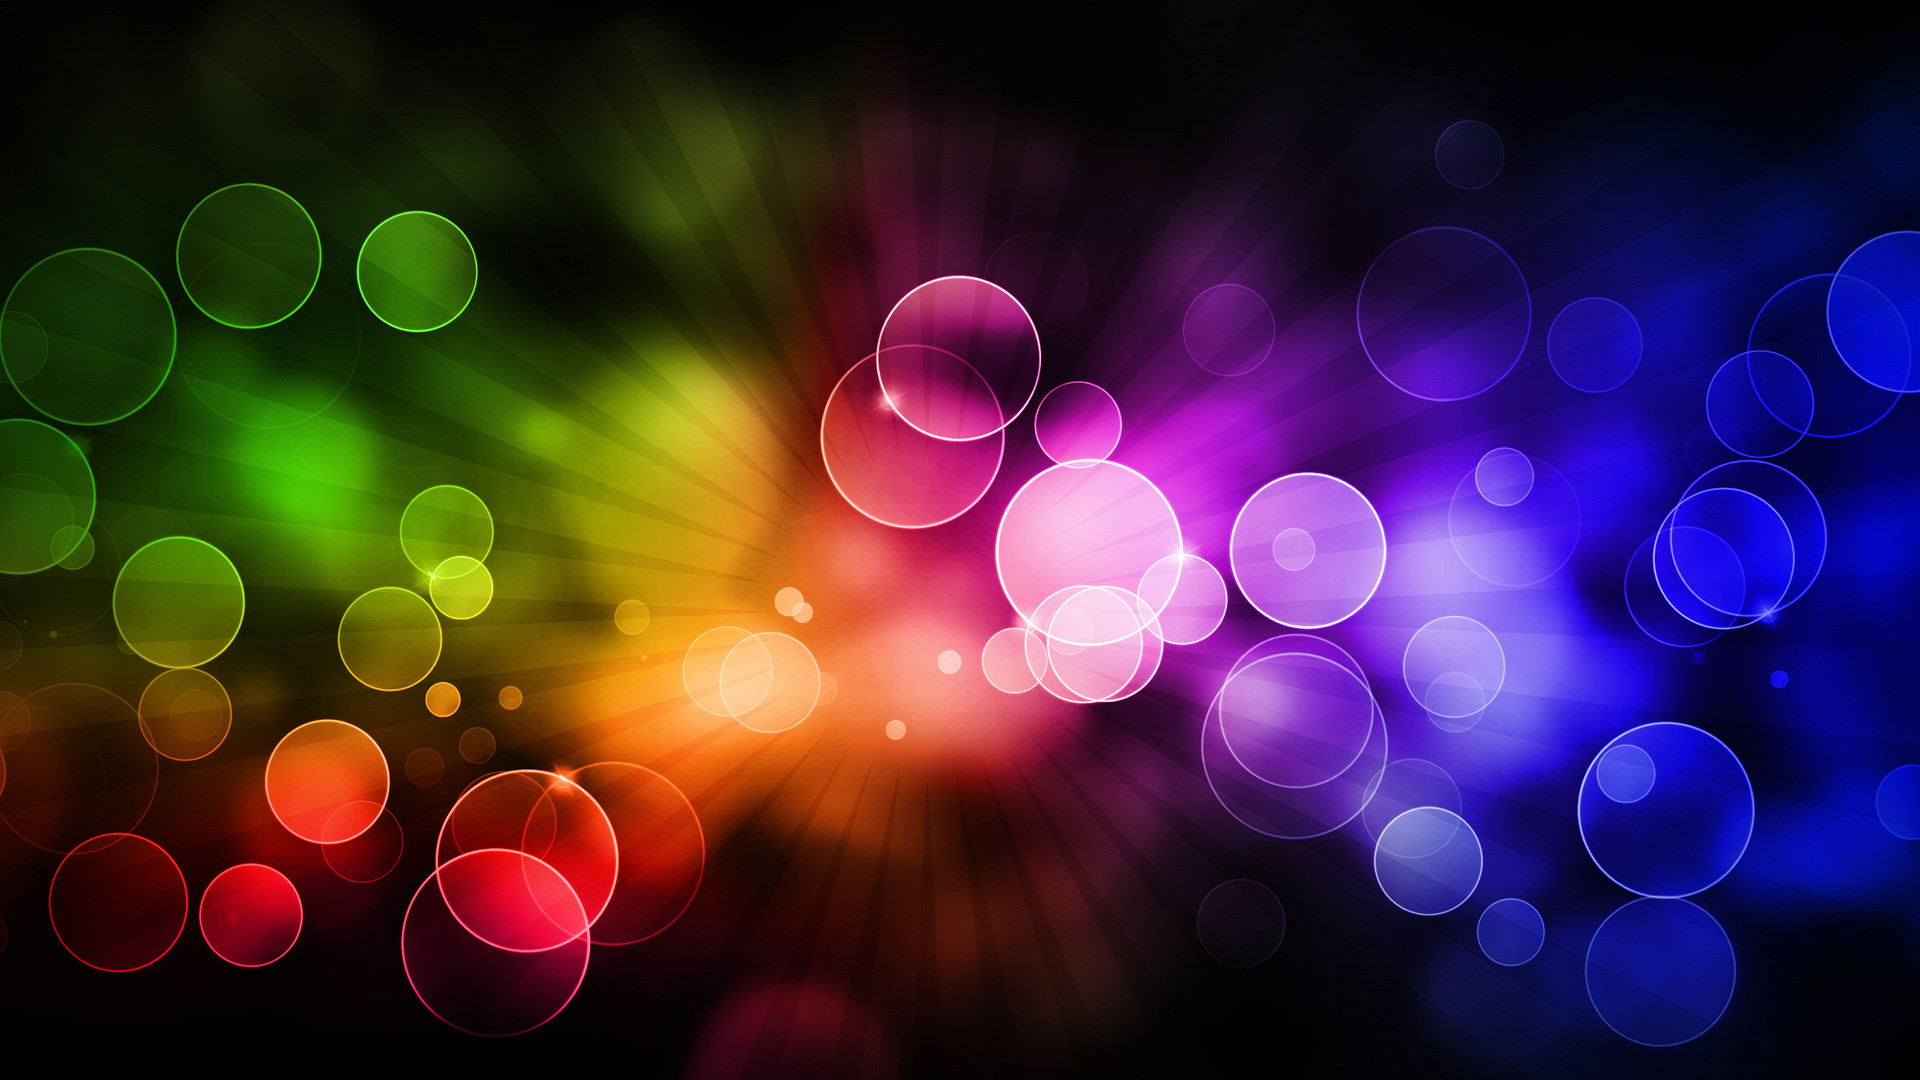 1103544 Cool Rainbow Backgrounds 1920x1080 High Resolution 